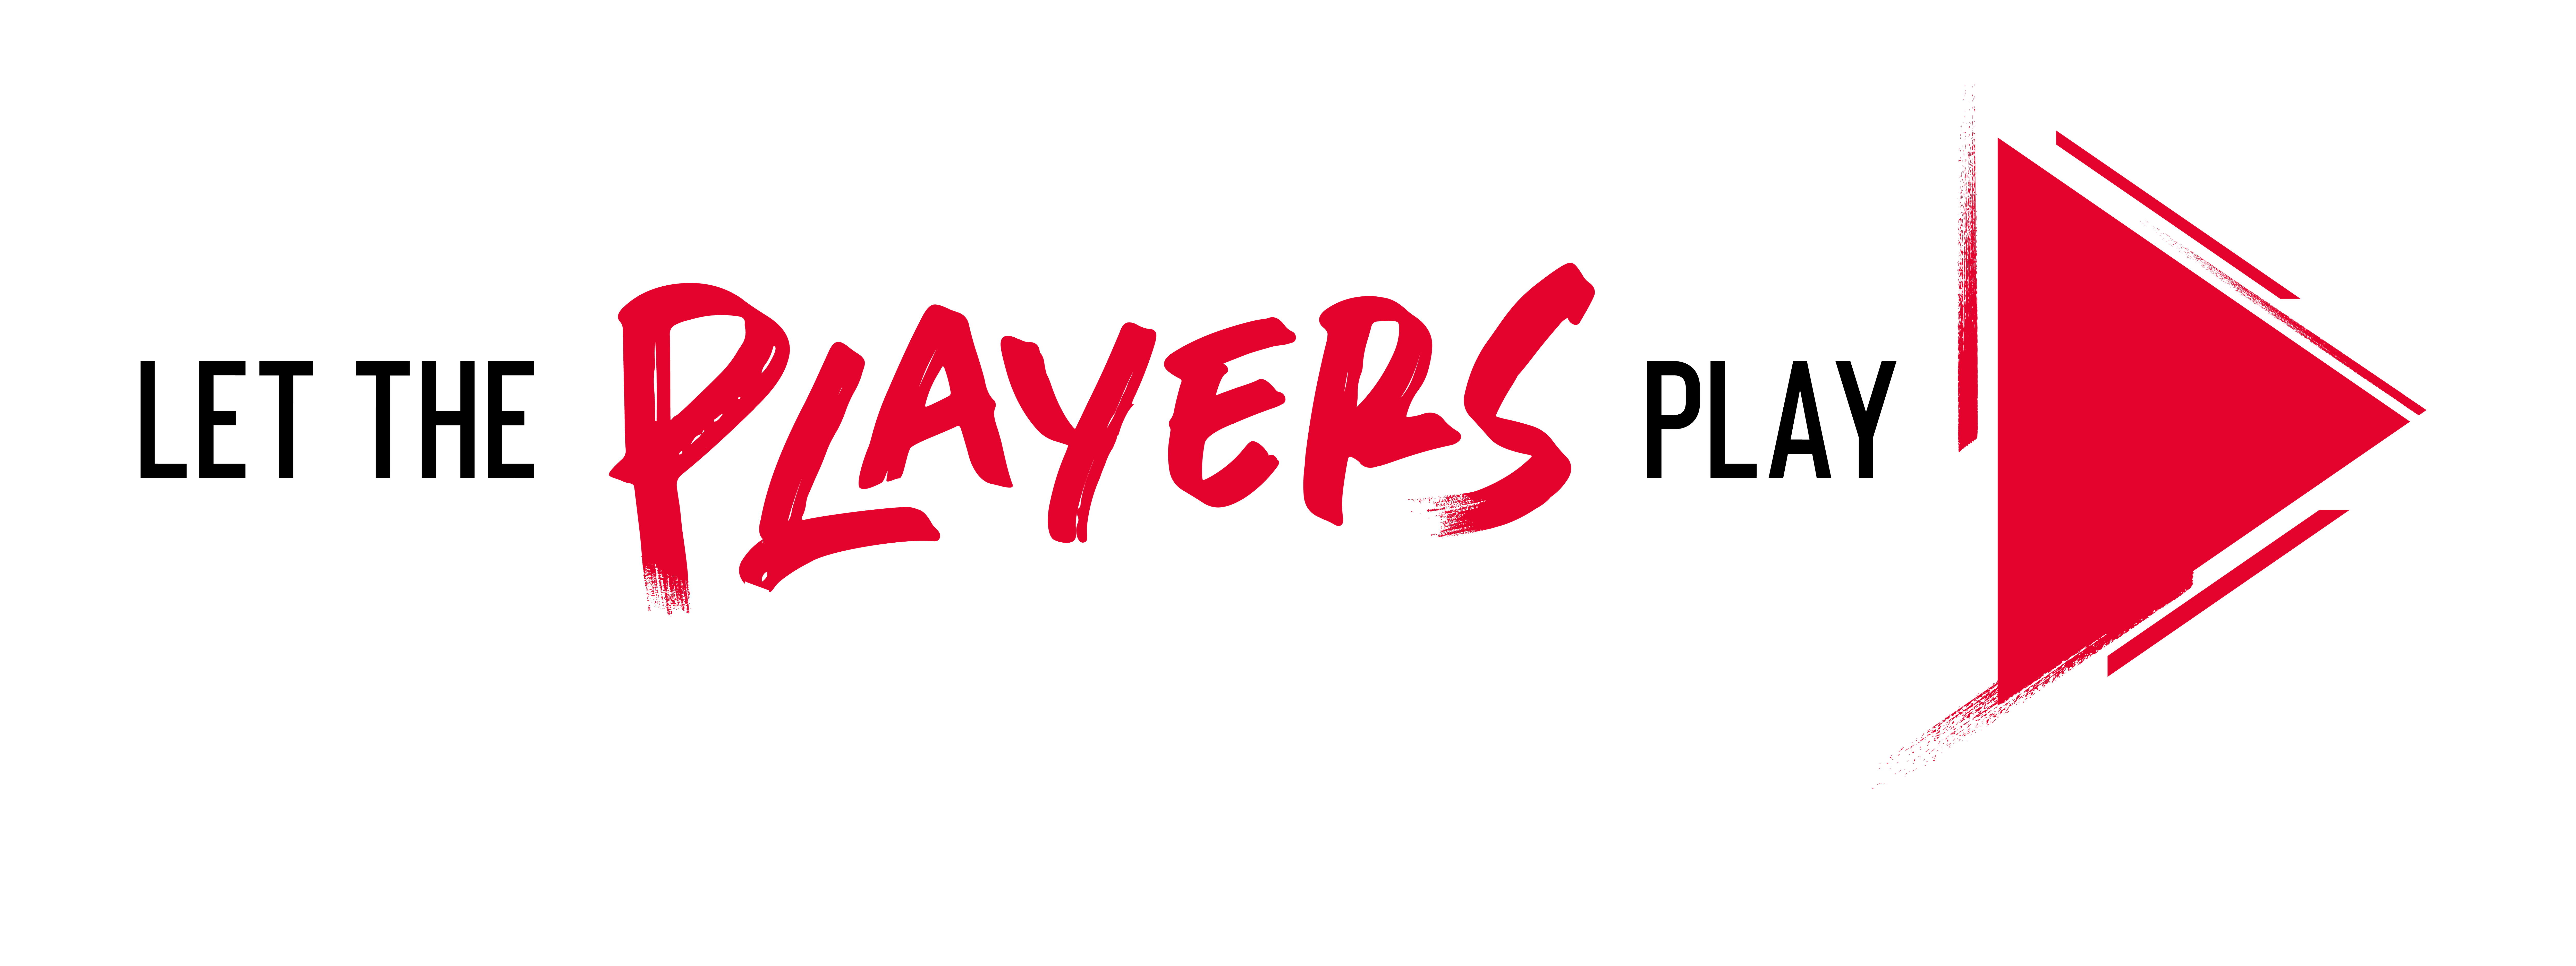 Let The Players Play